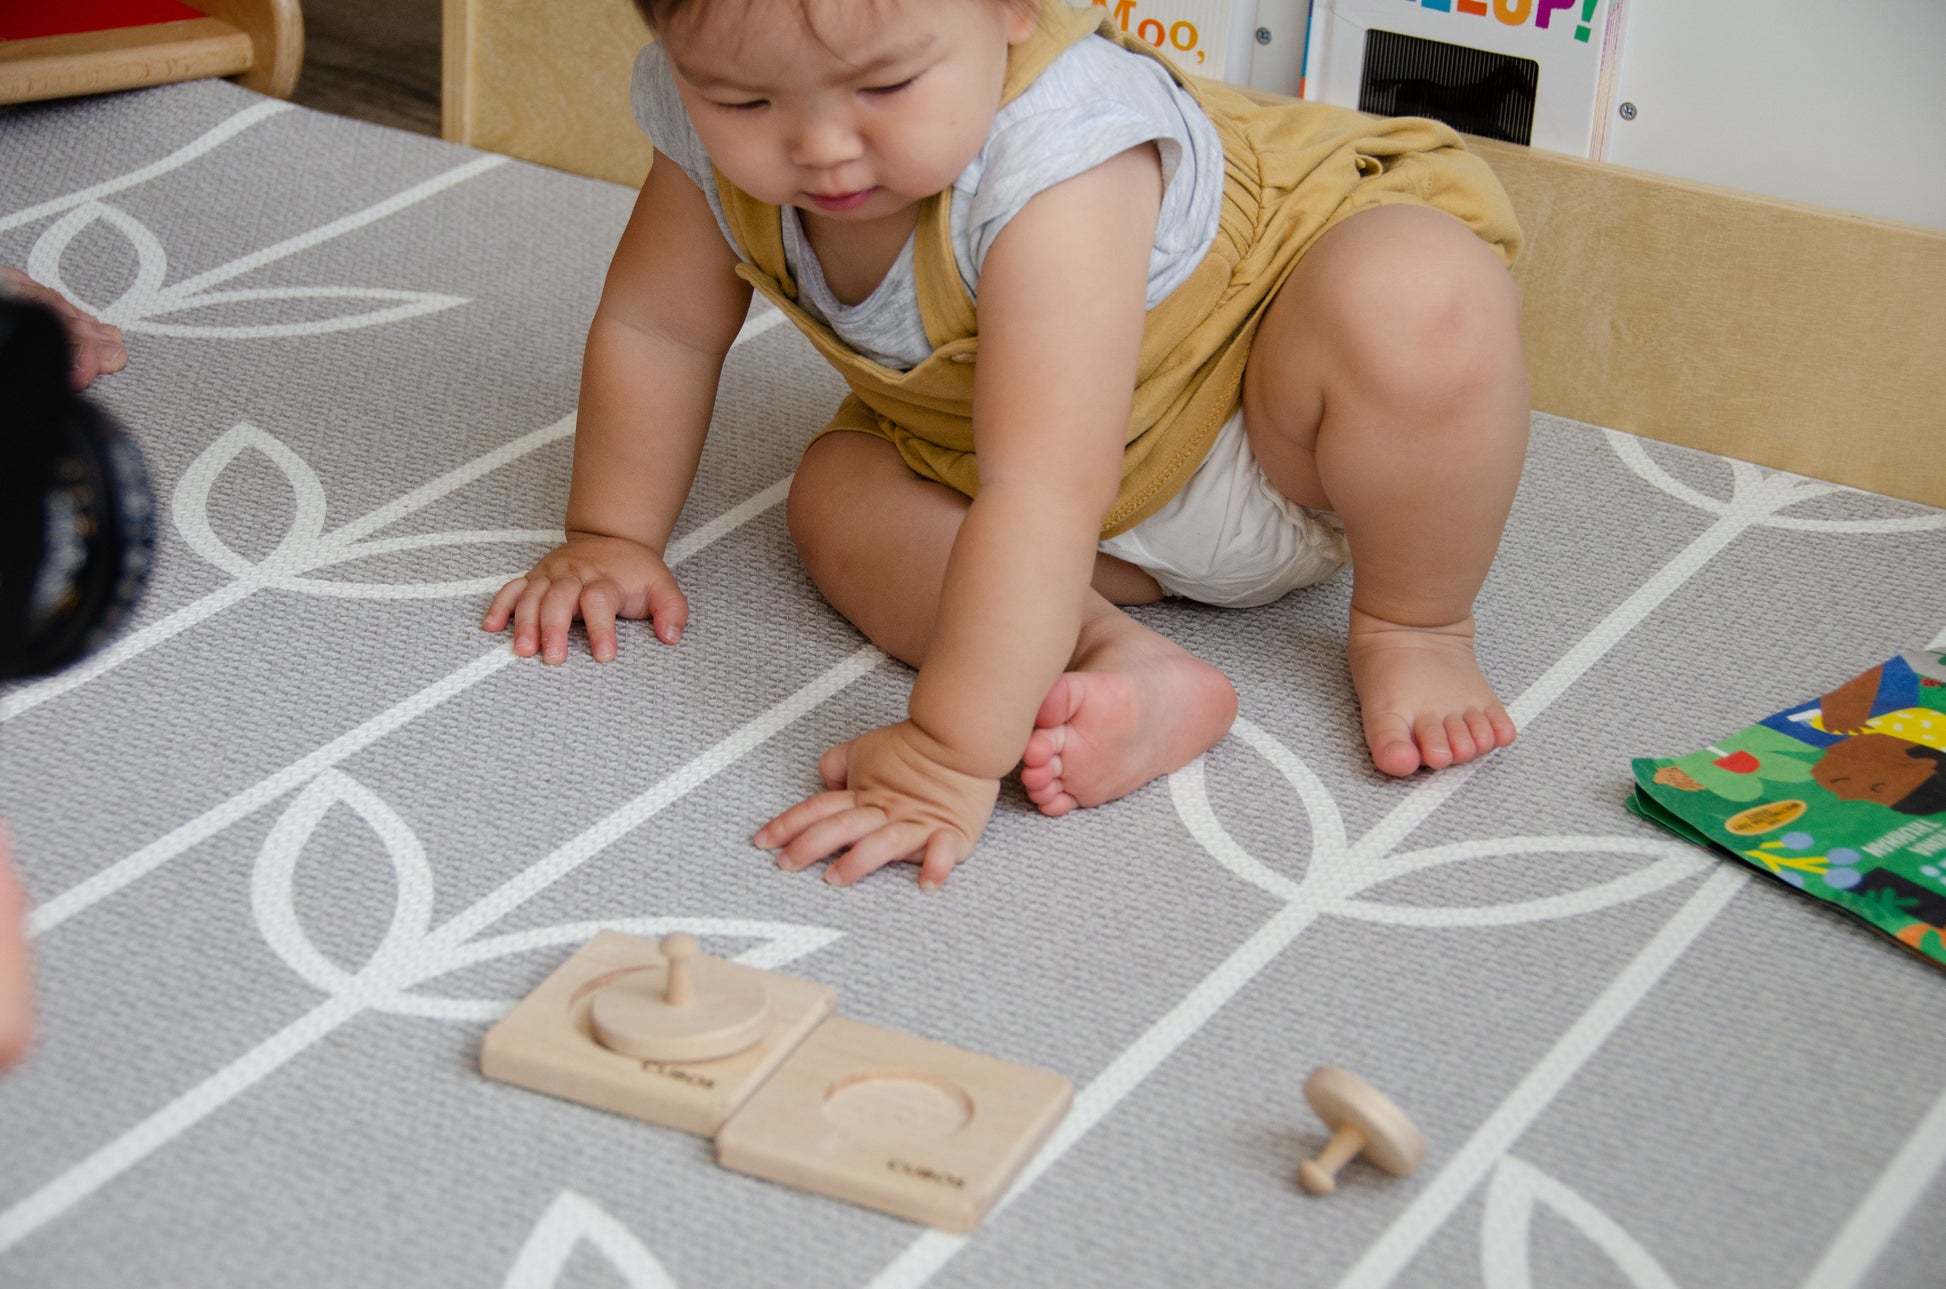 Baby enthusiastically playing with the Cubos 2 Different Size Circle Puzzle, crafted from hardwood with its natural wooden color, exploring and solving the puzzle with keen interest and focus.